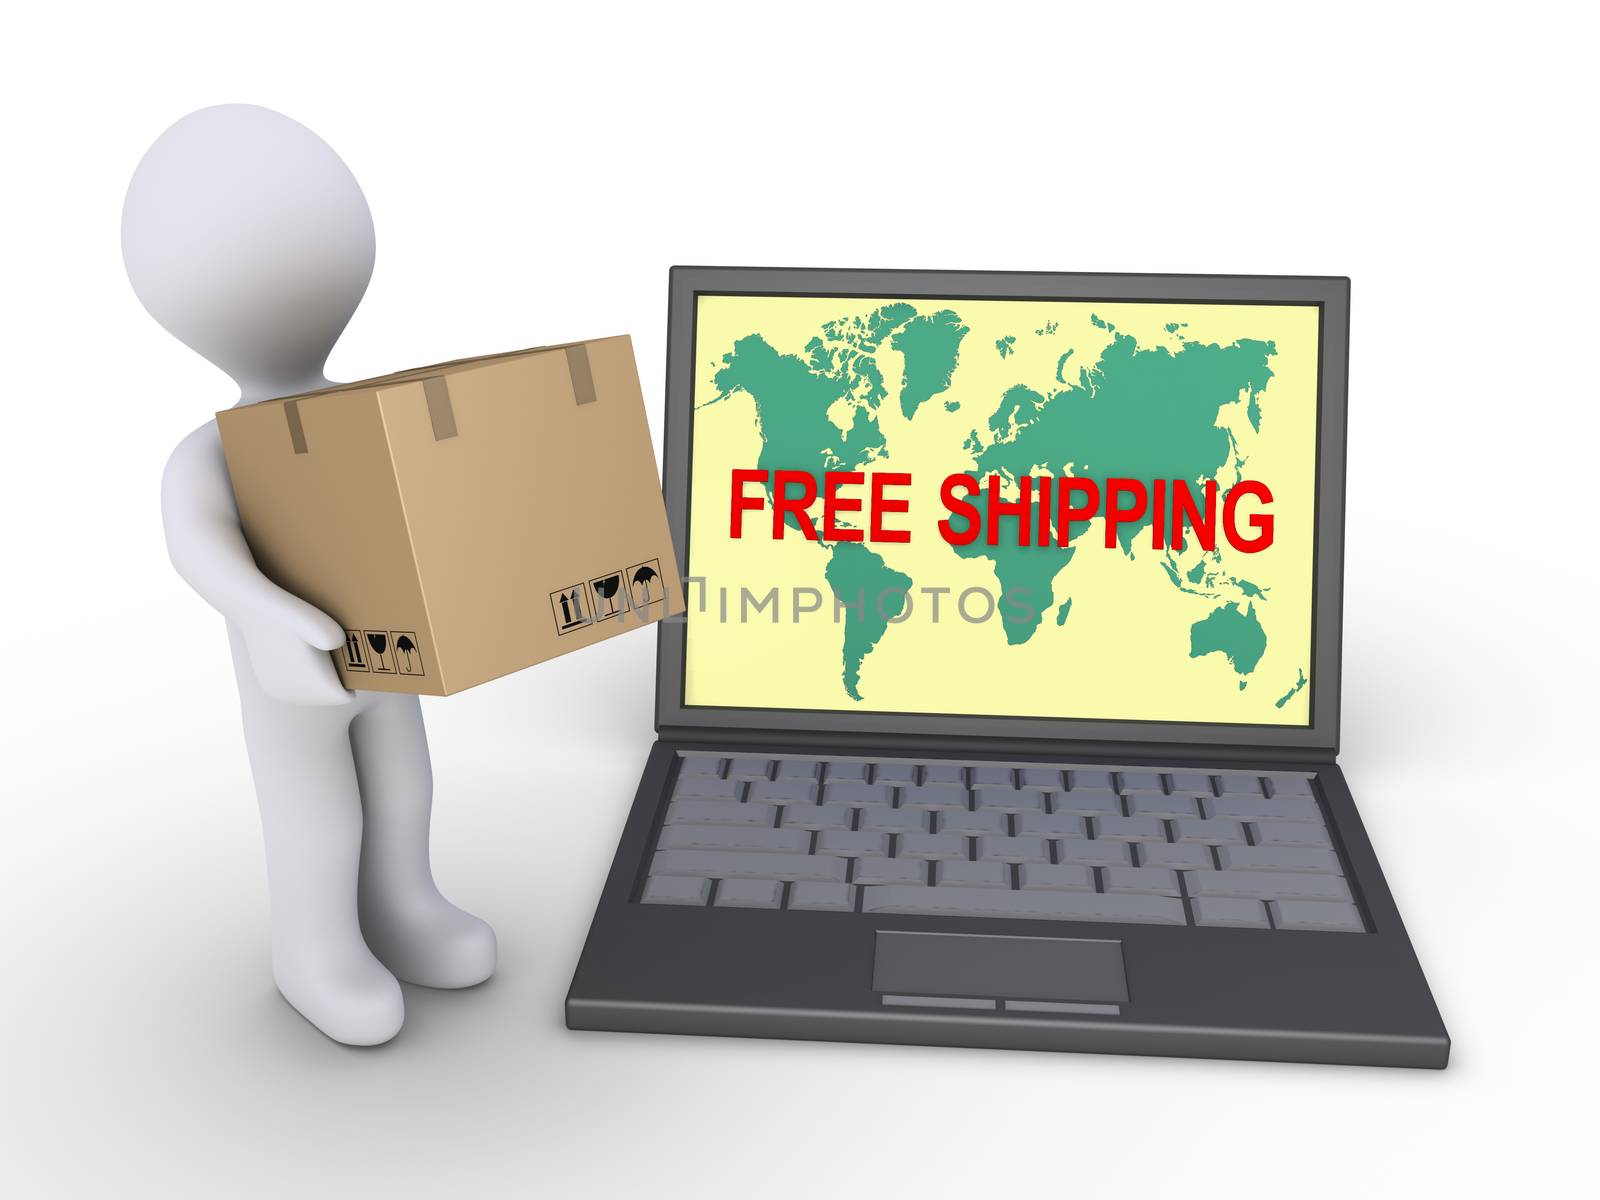 Person with cardboard box is next to laptop with the world map and FREE SHIPPING text